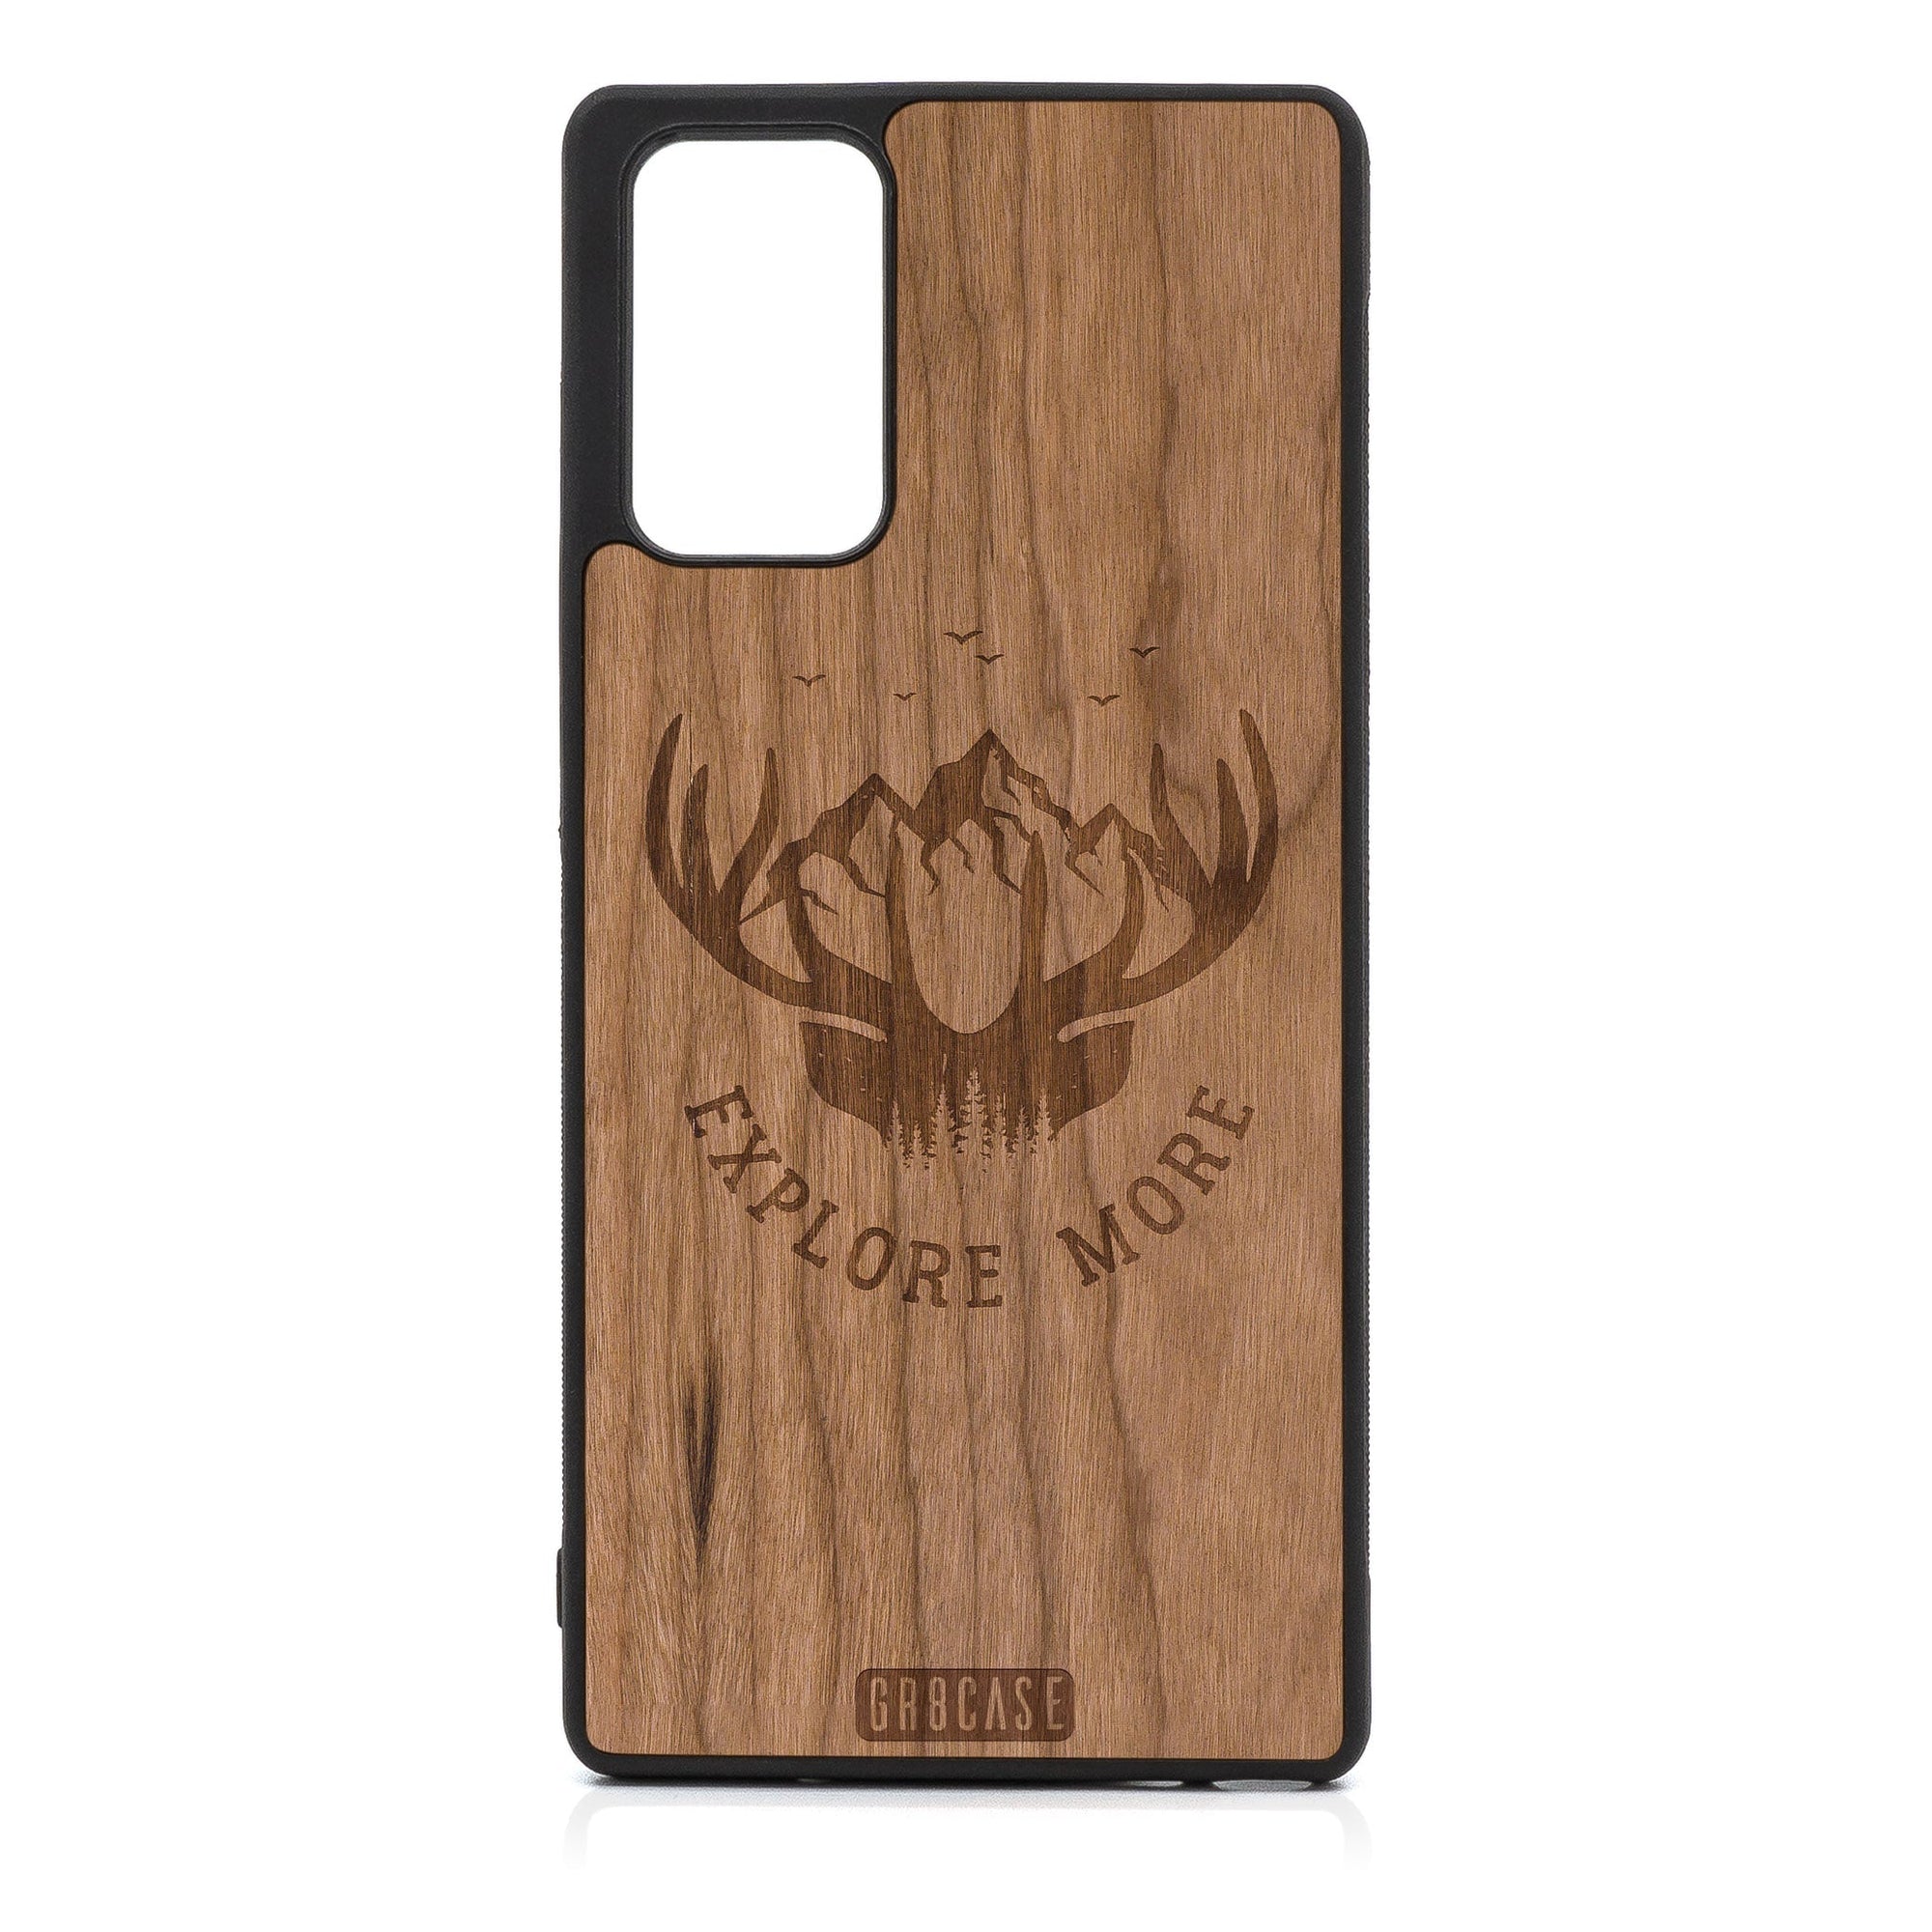 Explore More (Mountain & Antlers) Design Wood Case For Samsung Galaxy A71 5G